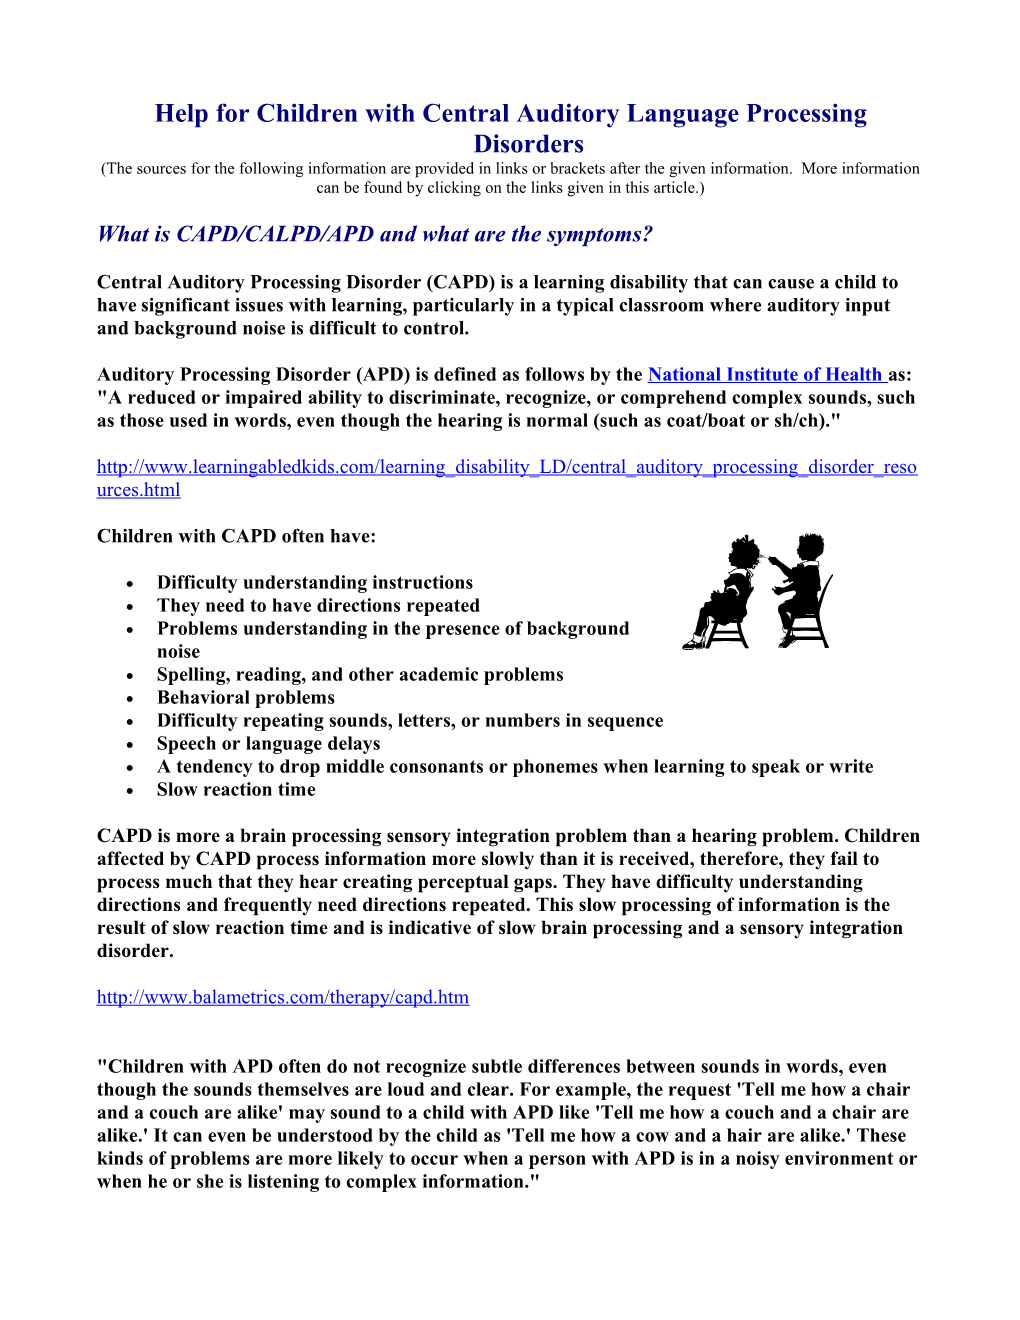 Help for Children with Central Auditory Language Processing Disorders